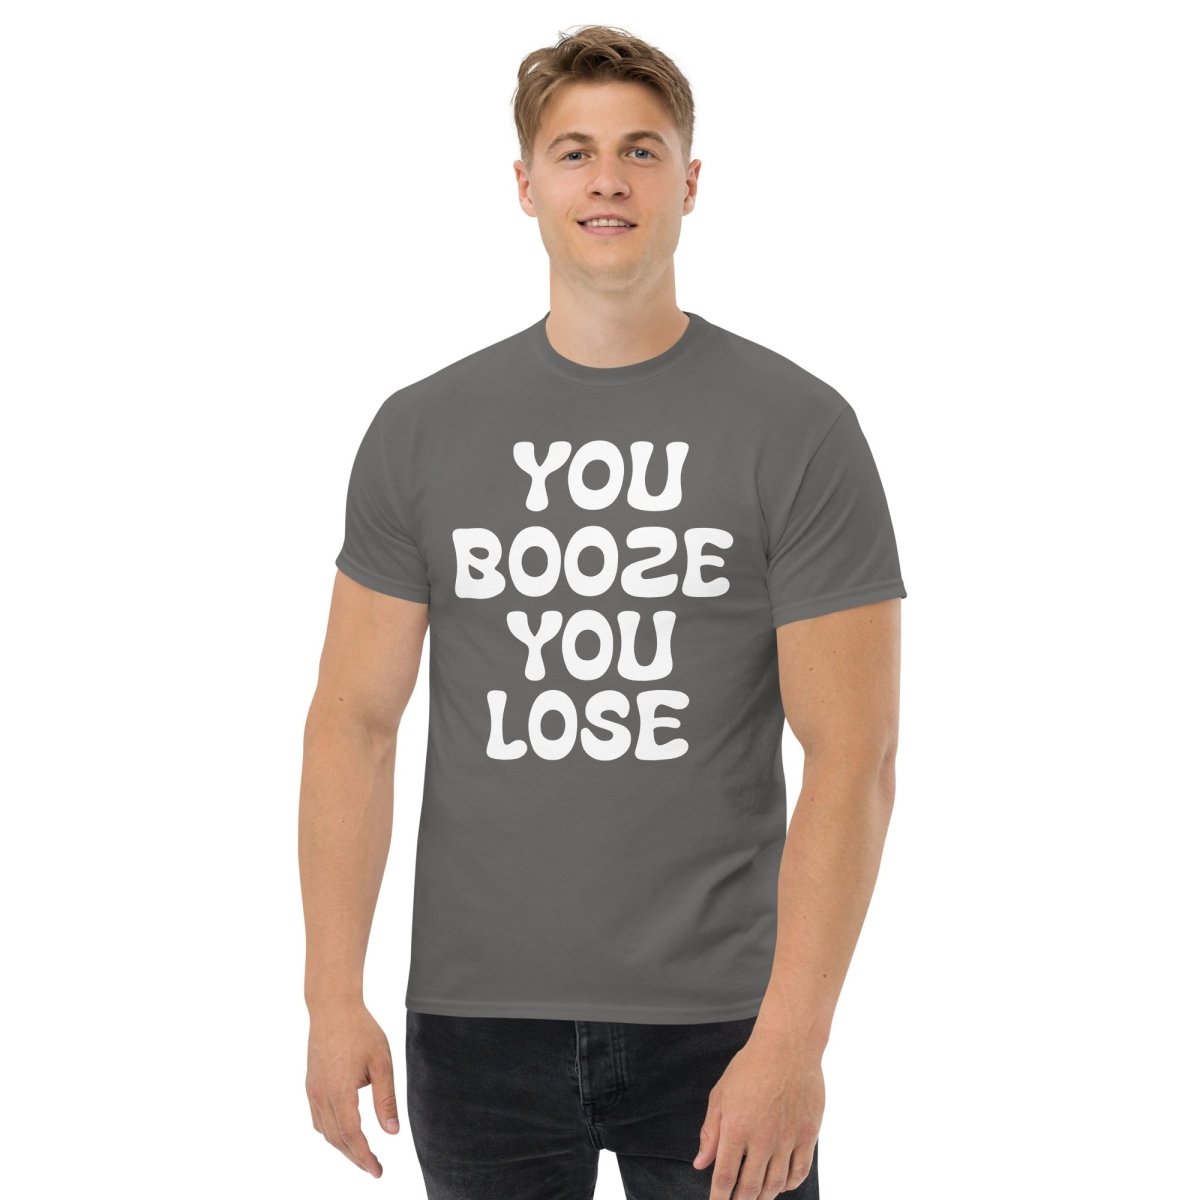 You Booze, You Lose - Men's Classic Statement Tee - Clean & Sober